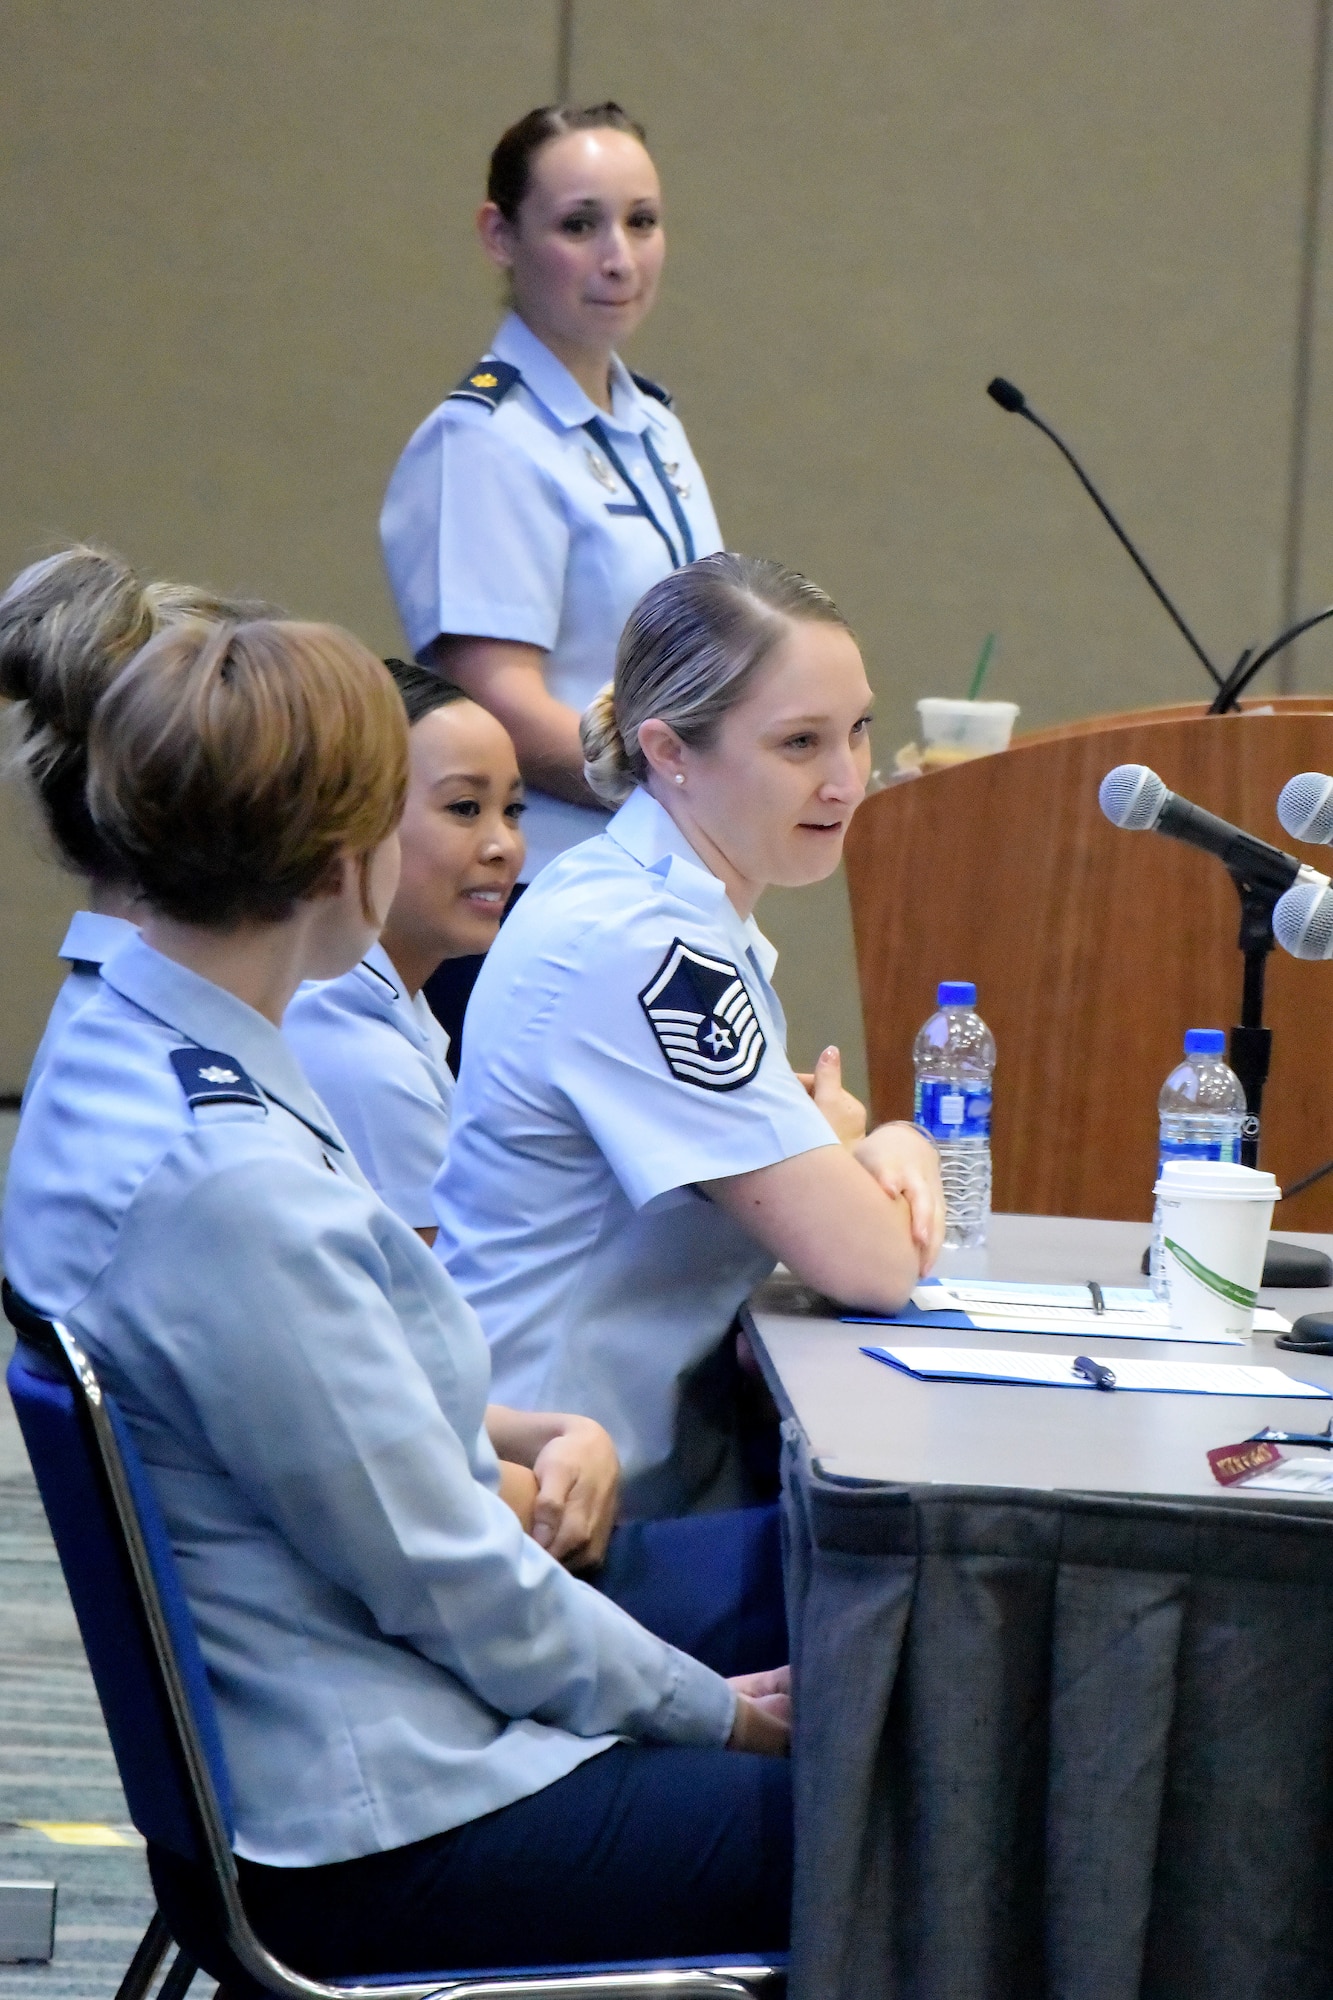 Speakers share insight during an Air Force-specific breakout discussion at the 2018 Joint Women's Leadership Symposium June 22, 2018, in San Diego, Calif. This year’s theme “The Power Within You” featured practical workshops, joint discussion boards, an international speakers panel and service specific breakout sessions intended to promote personal and professional development. (U.S. Air Force photo by 1st Lt. Annabel Monroe)